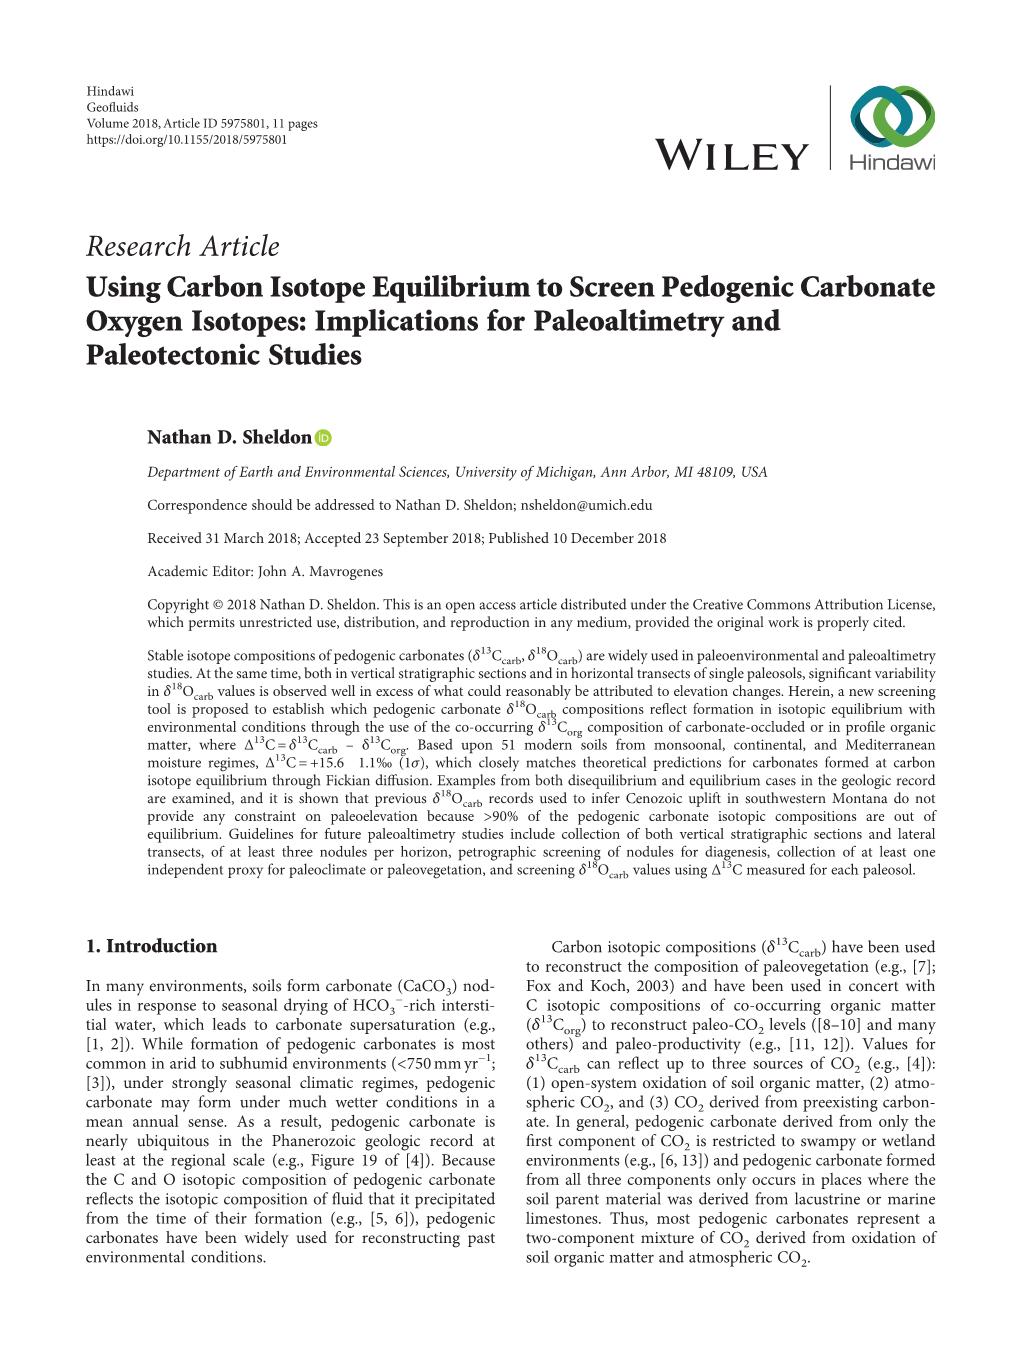 Research Article Using Carbon Isotope Equilibrium to Screen Pedogenic Carbonate Oxygen Isotopes: Implications for Paleoaltimetry and Paleotectonic Studies